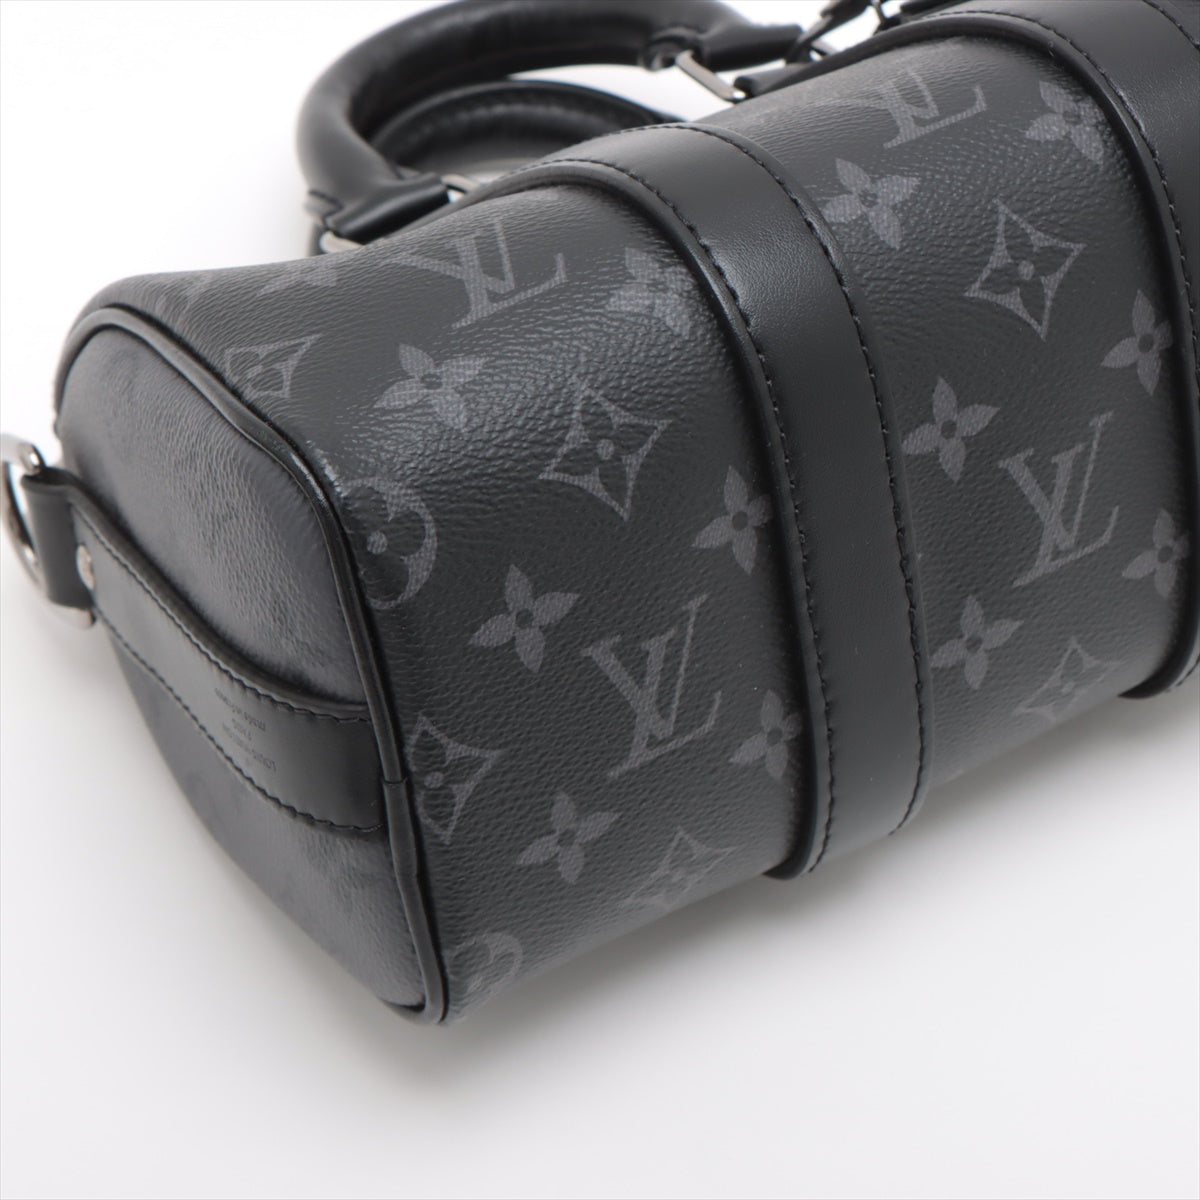 Louis Vuitton Monogram Eclipse Keepall Bandoulière 25 M46271 There was an RFID response